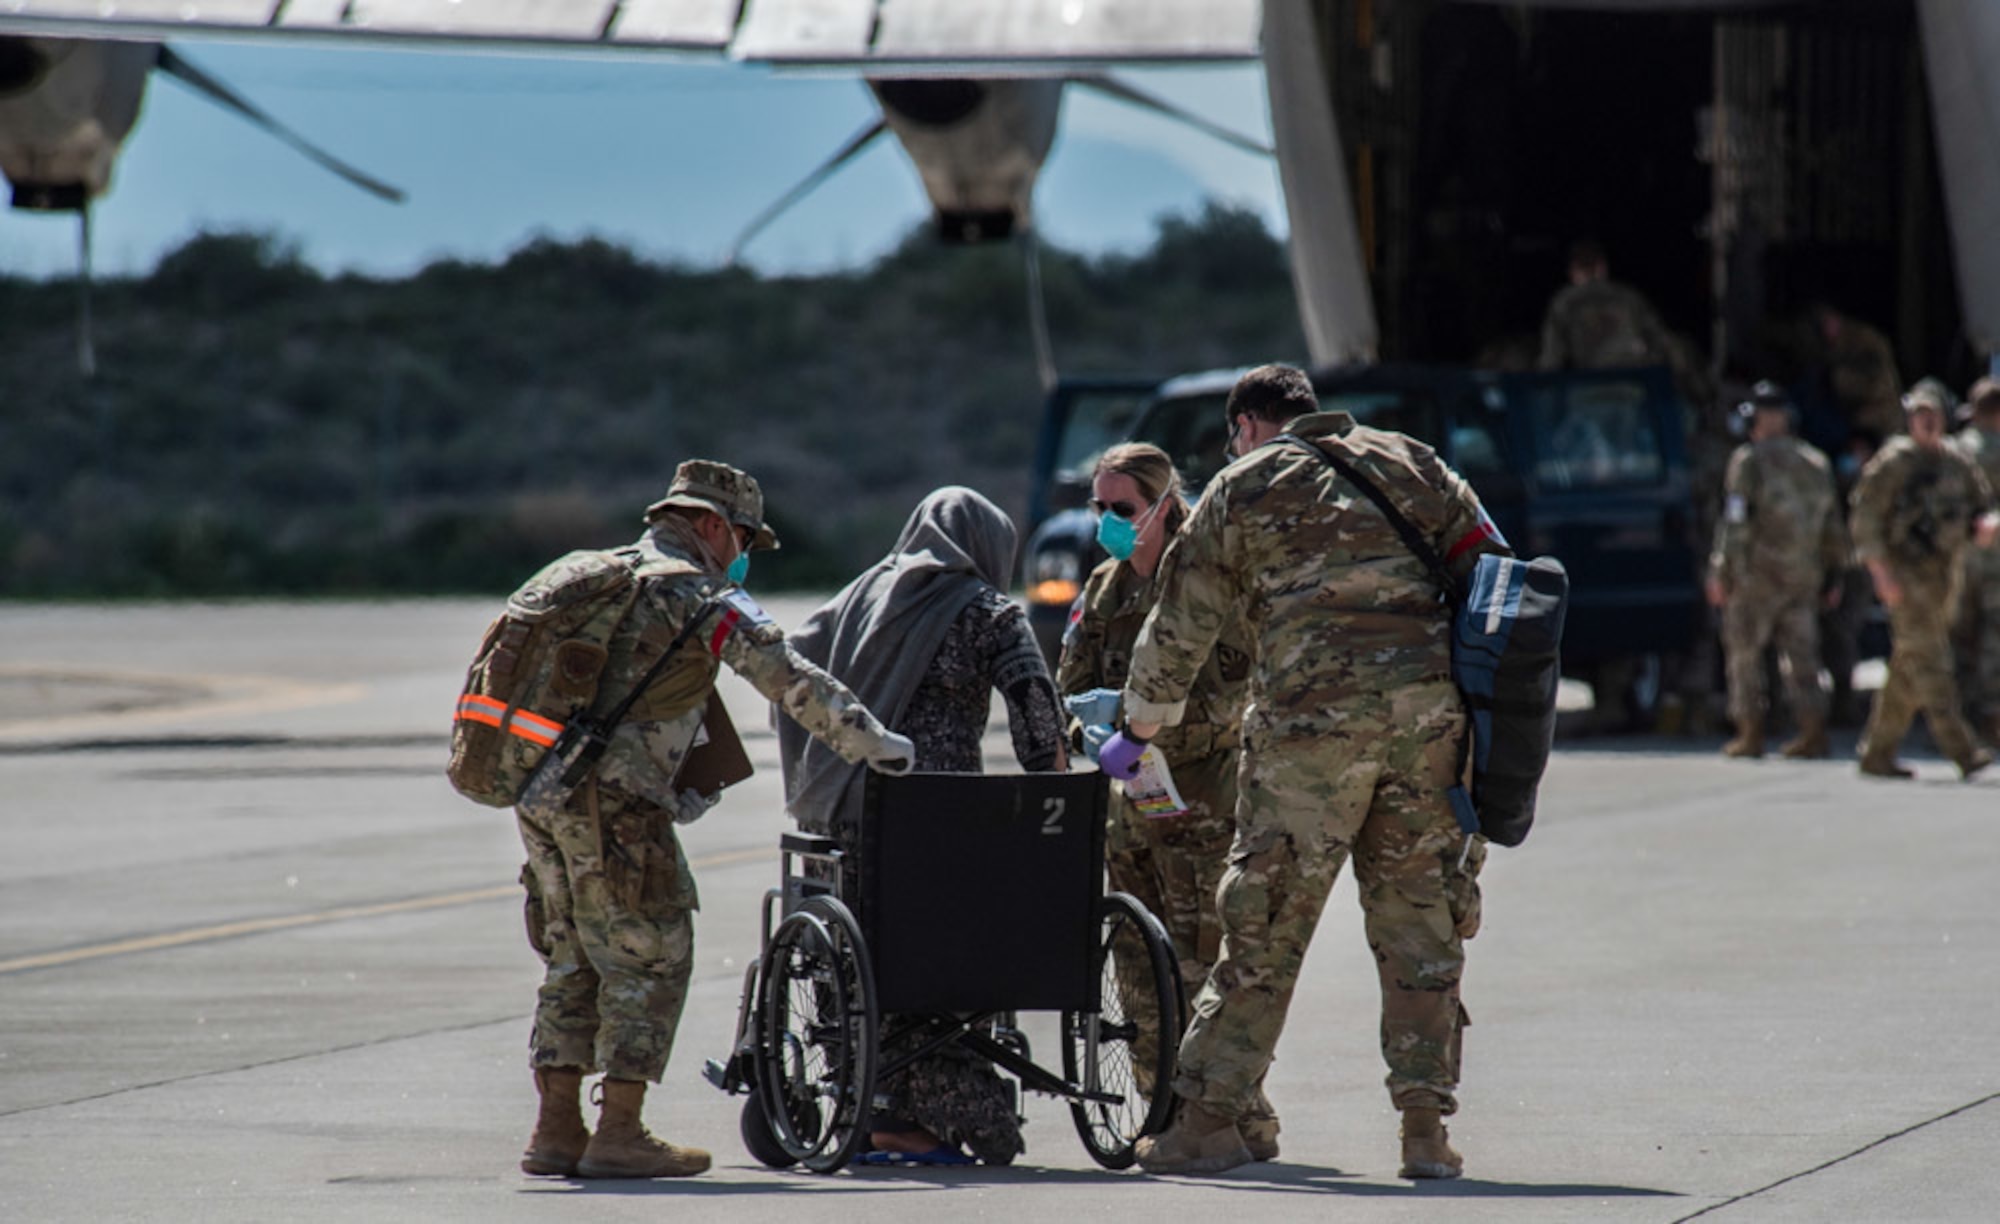 Airmen from Task Force-Holloman assist an Afghan evacuee into a wheelchair on the ramp at Holloman Air Force Base, New Mexico, Aug. 31, 2021. The Department of Defense, through U.S. Northern Command, and in support of the Department of State and Department of Homeland Security, is providing transportation, temporary housing, medical screening, and general support for up to 50,000 Afghan evacuees at suitable facilities, in permanent or temporary structures, as quickly as possible. This initiative provides Afghan evacuees essential support at secure locations outside Afghanistan. (U.S. Air Force photo by Staff Sgt. Kenneth Boyton)